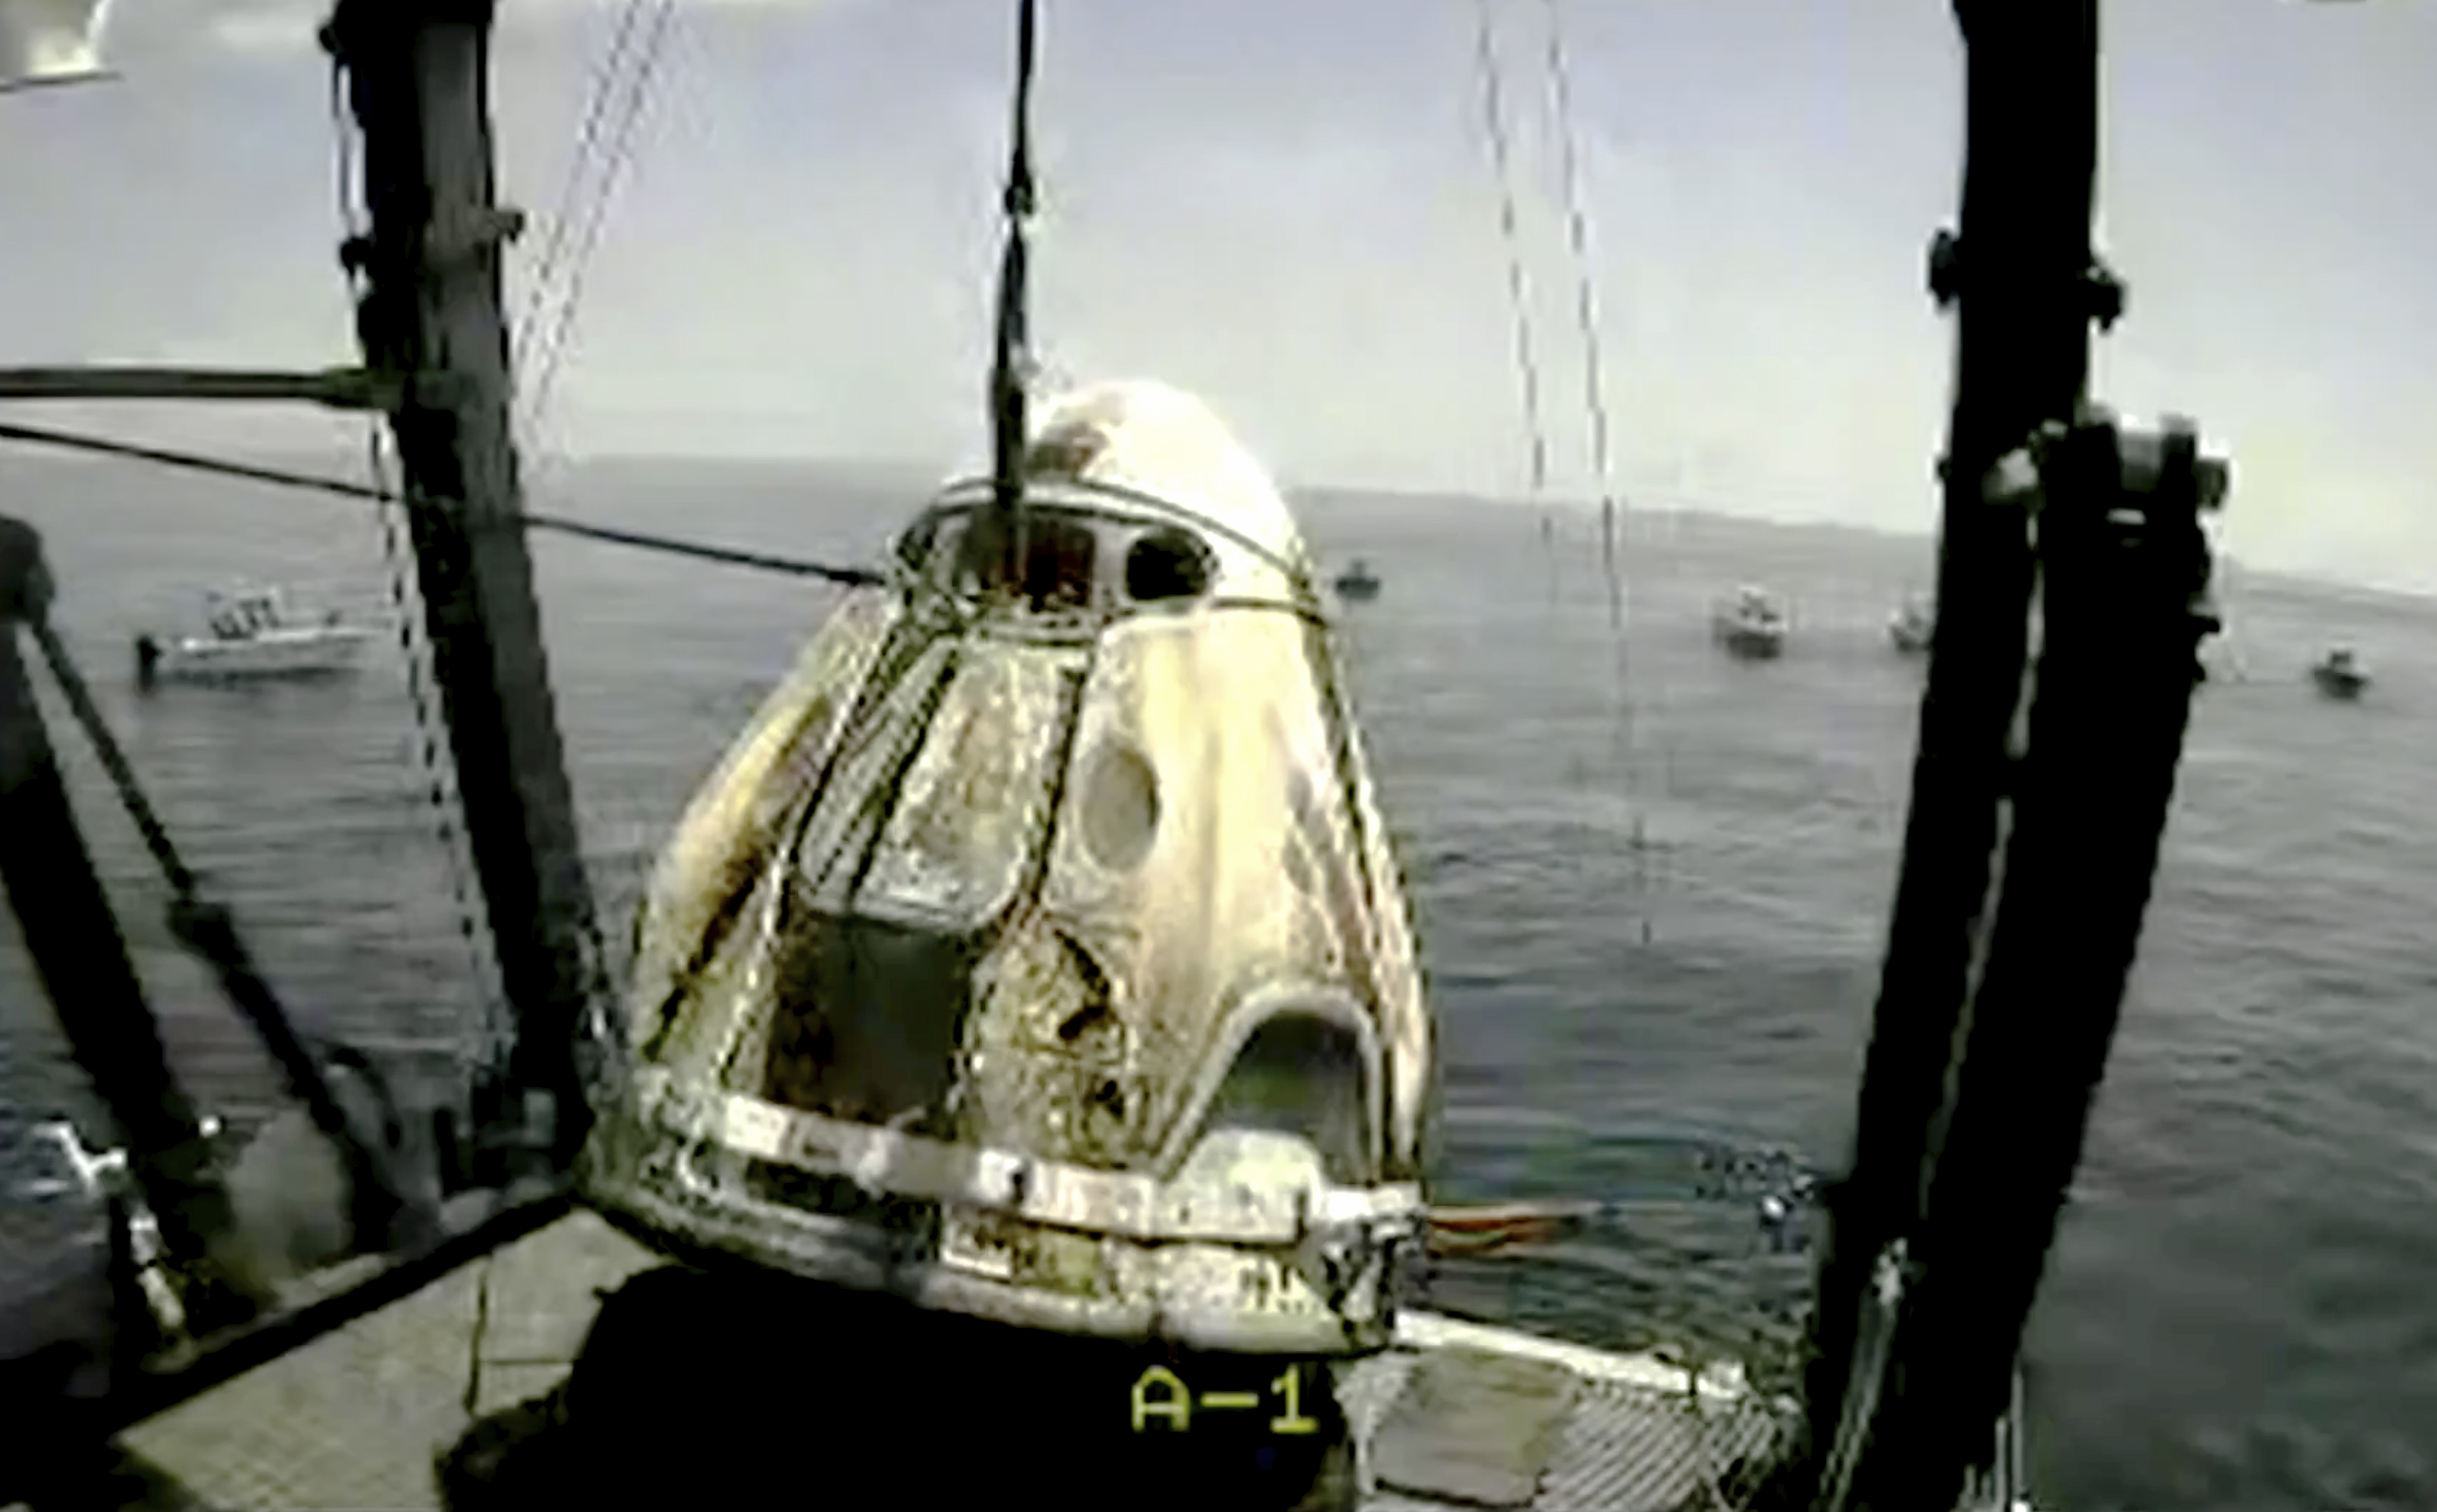 PHOTO: In this frame grab from NASA TV, the SpaceX capsule is lifted onto a ship, Aug. 2, 2020 in the Gulf of Mexico. 